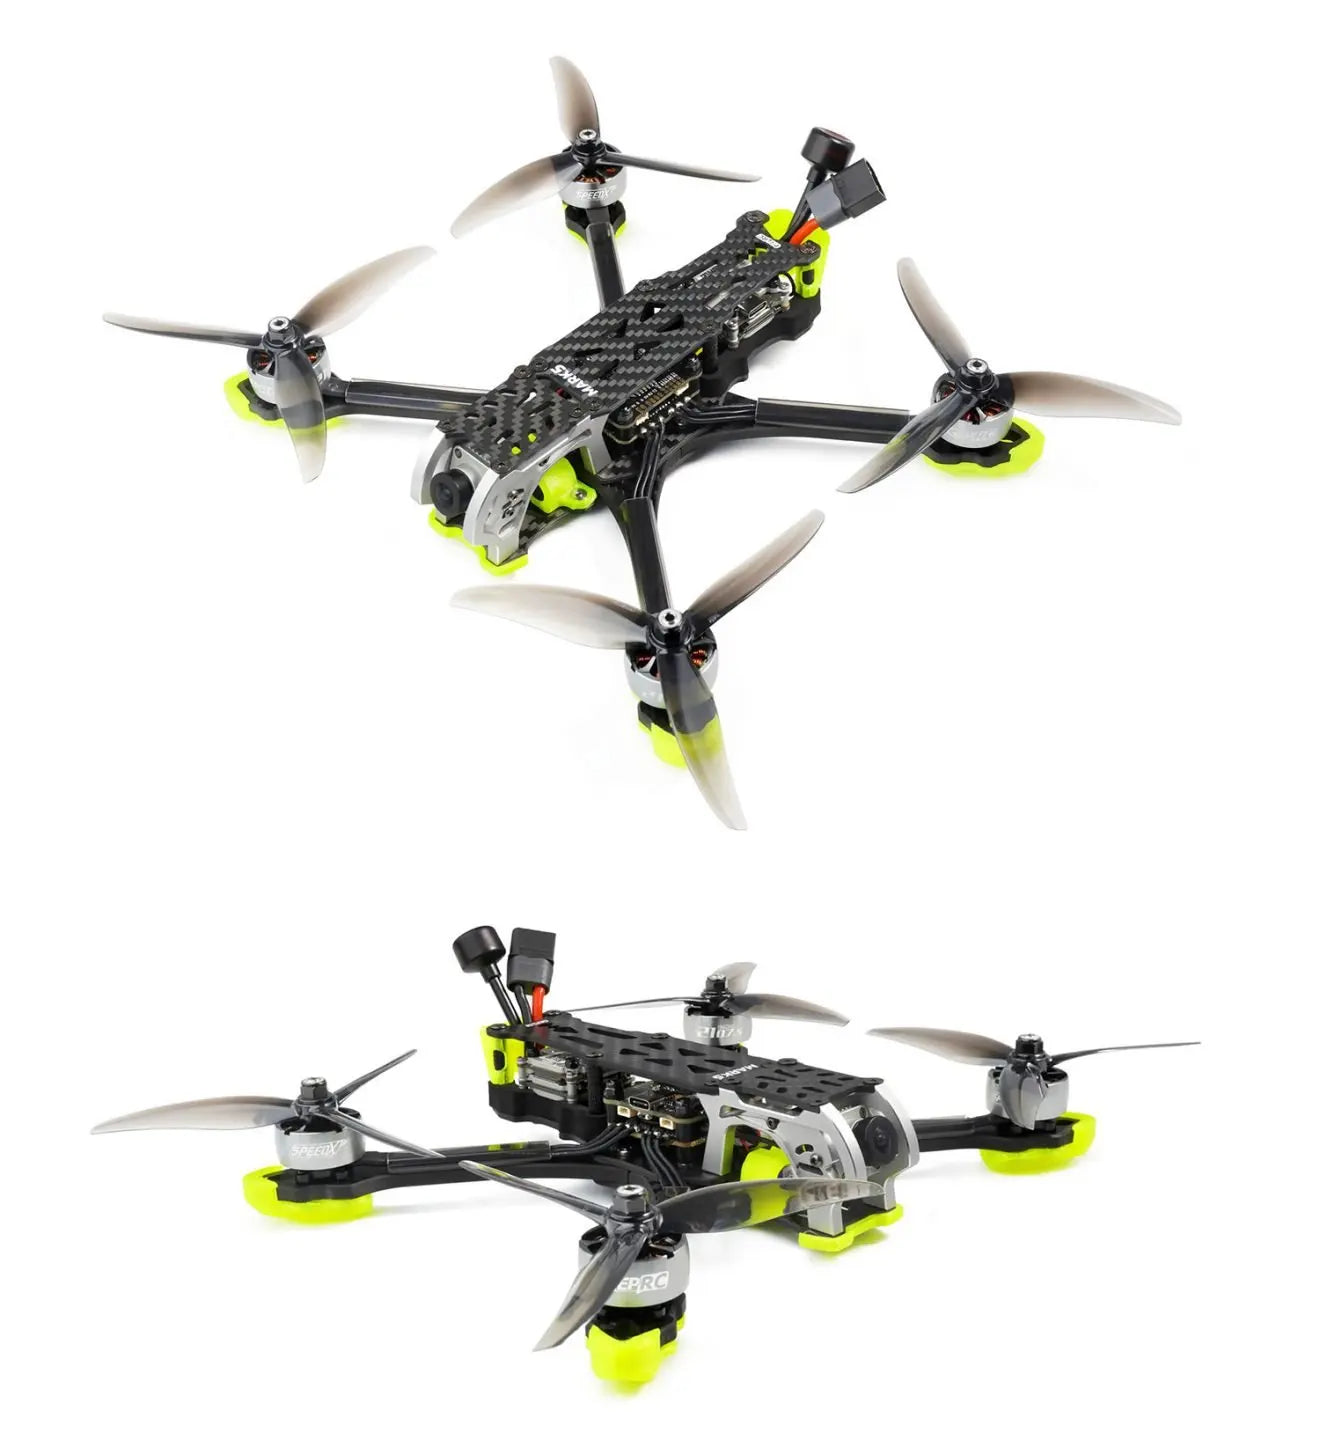 GEPRC MARK5 FPV Drone, Shipped with two different 3D printed action cam mounts that can be fitted with GoPro